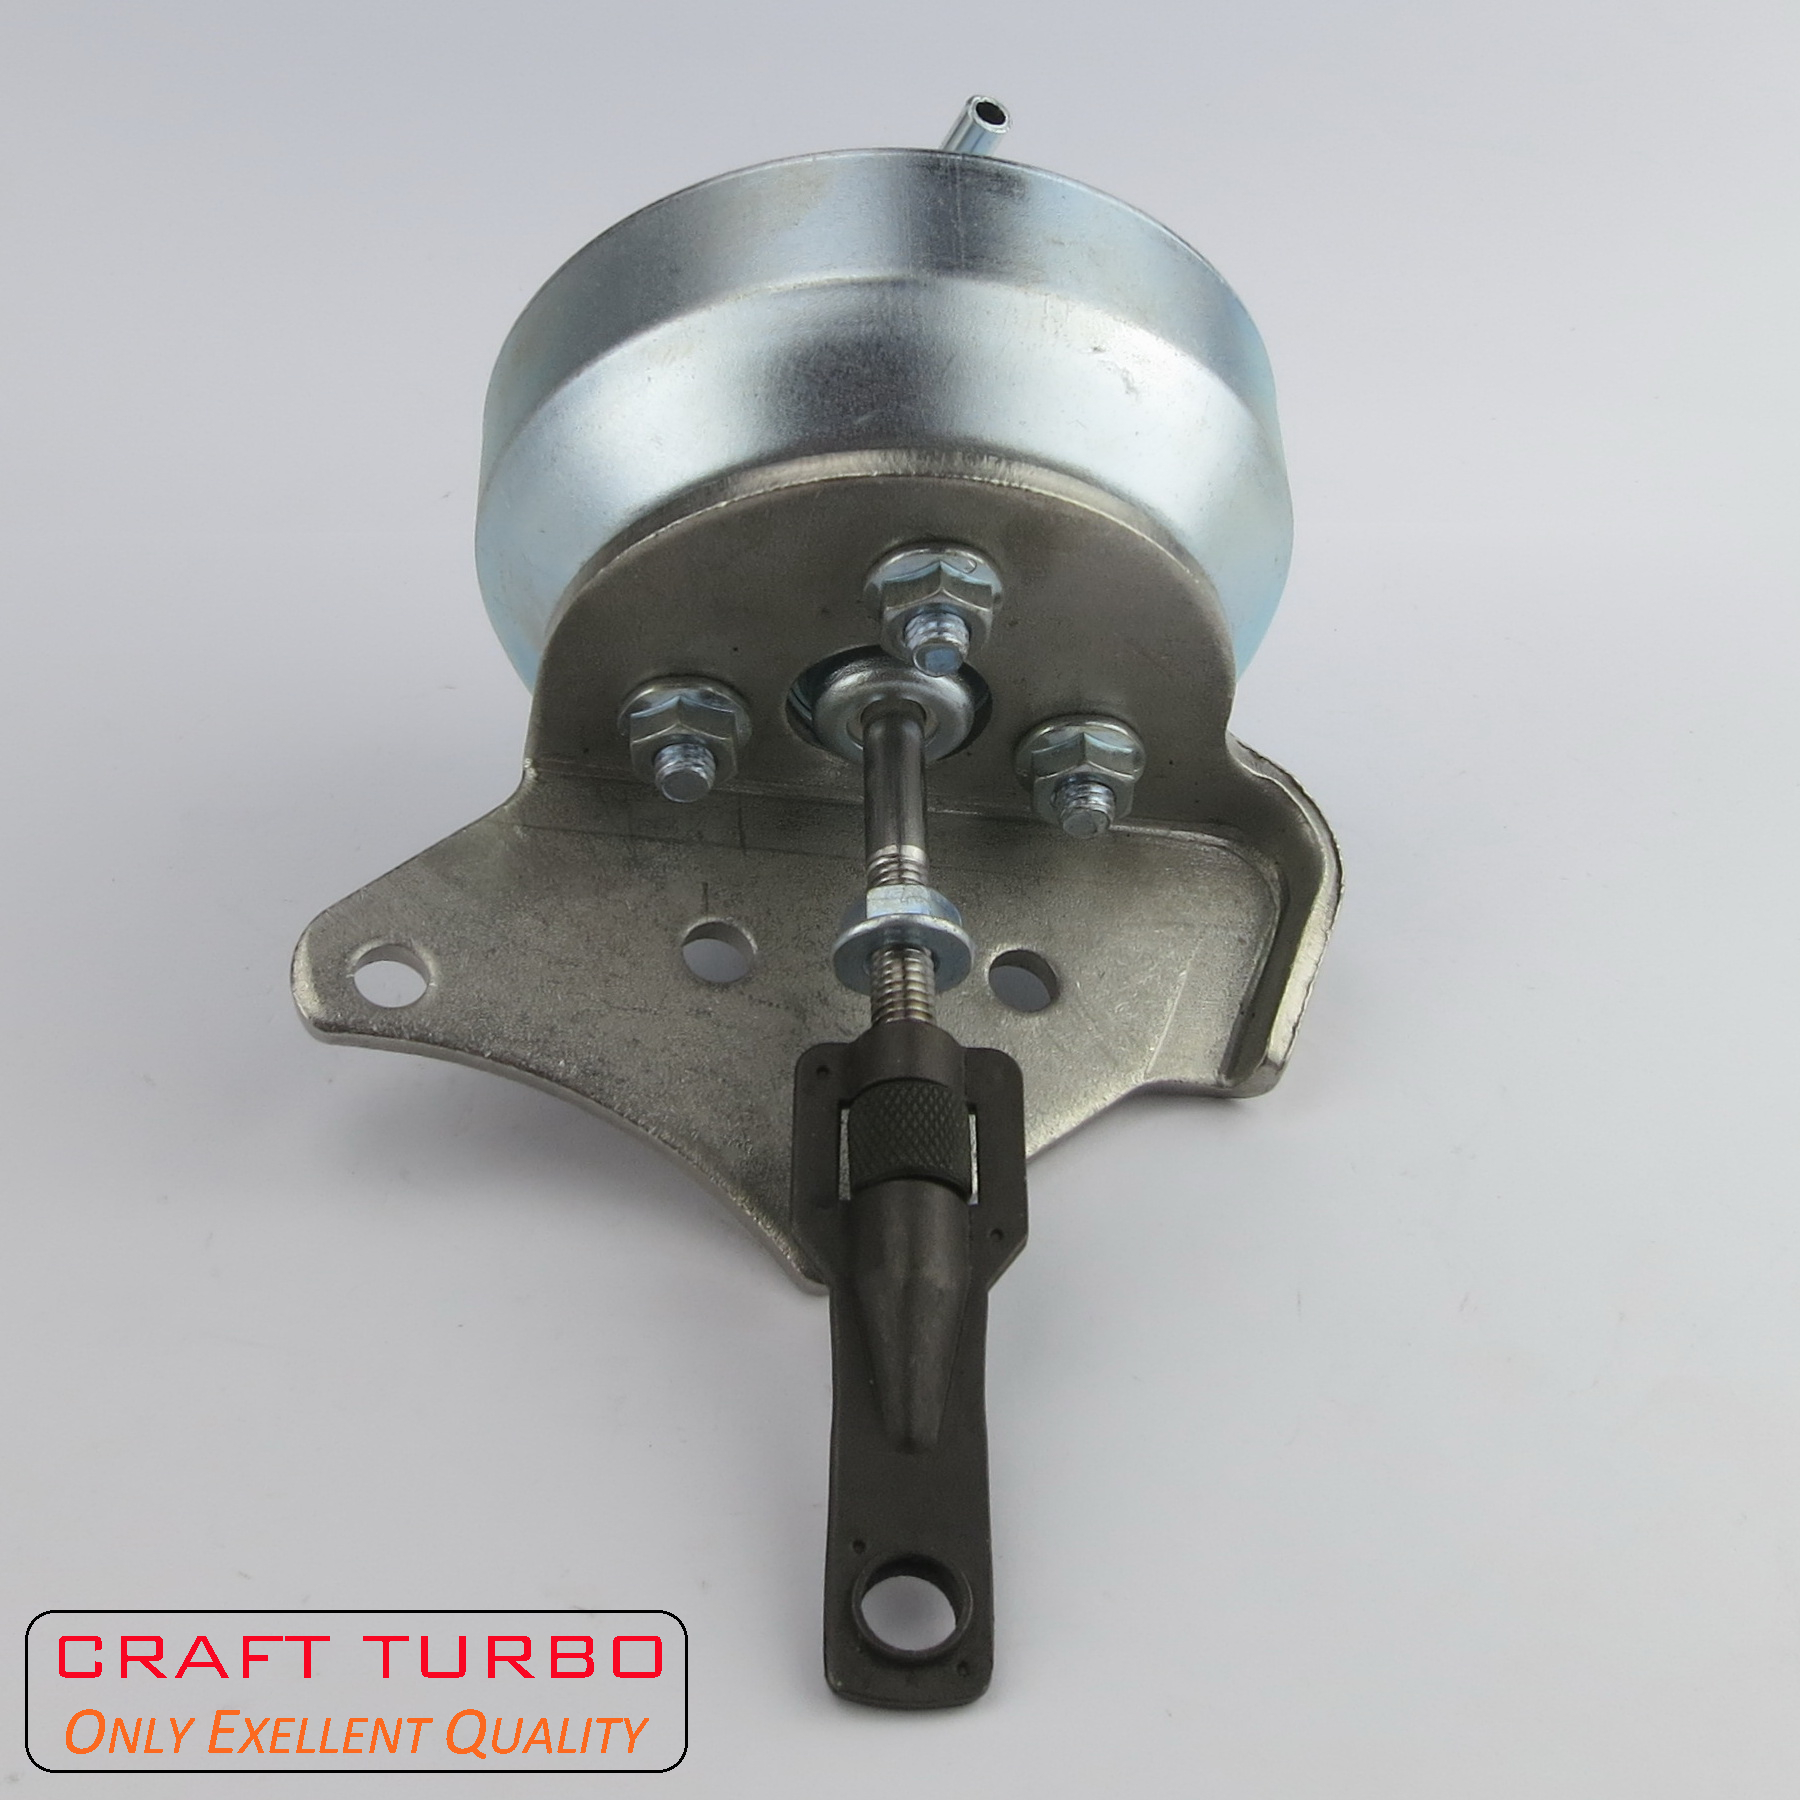 VV14 Actuator for Turbochargers